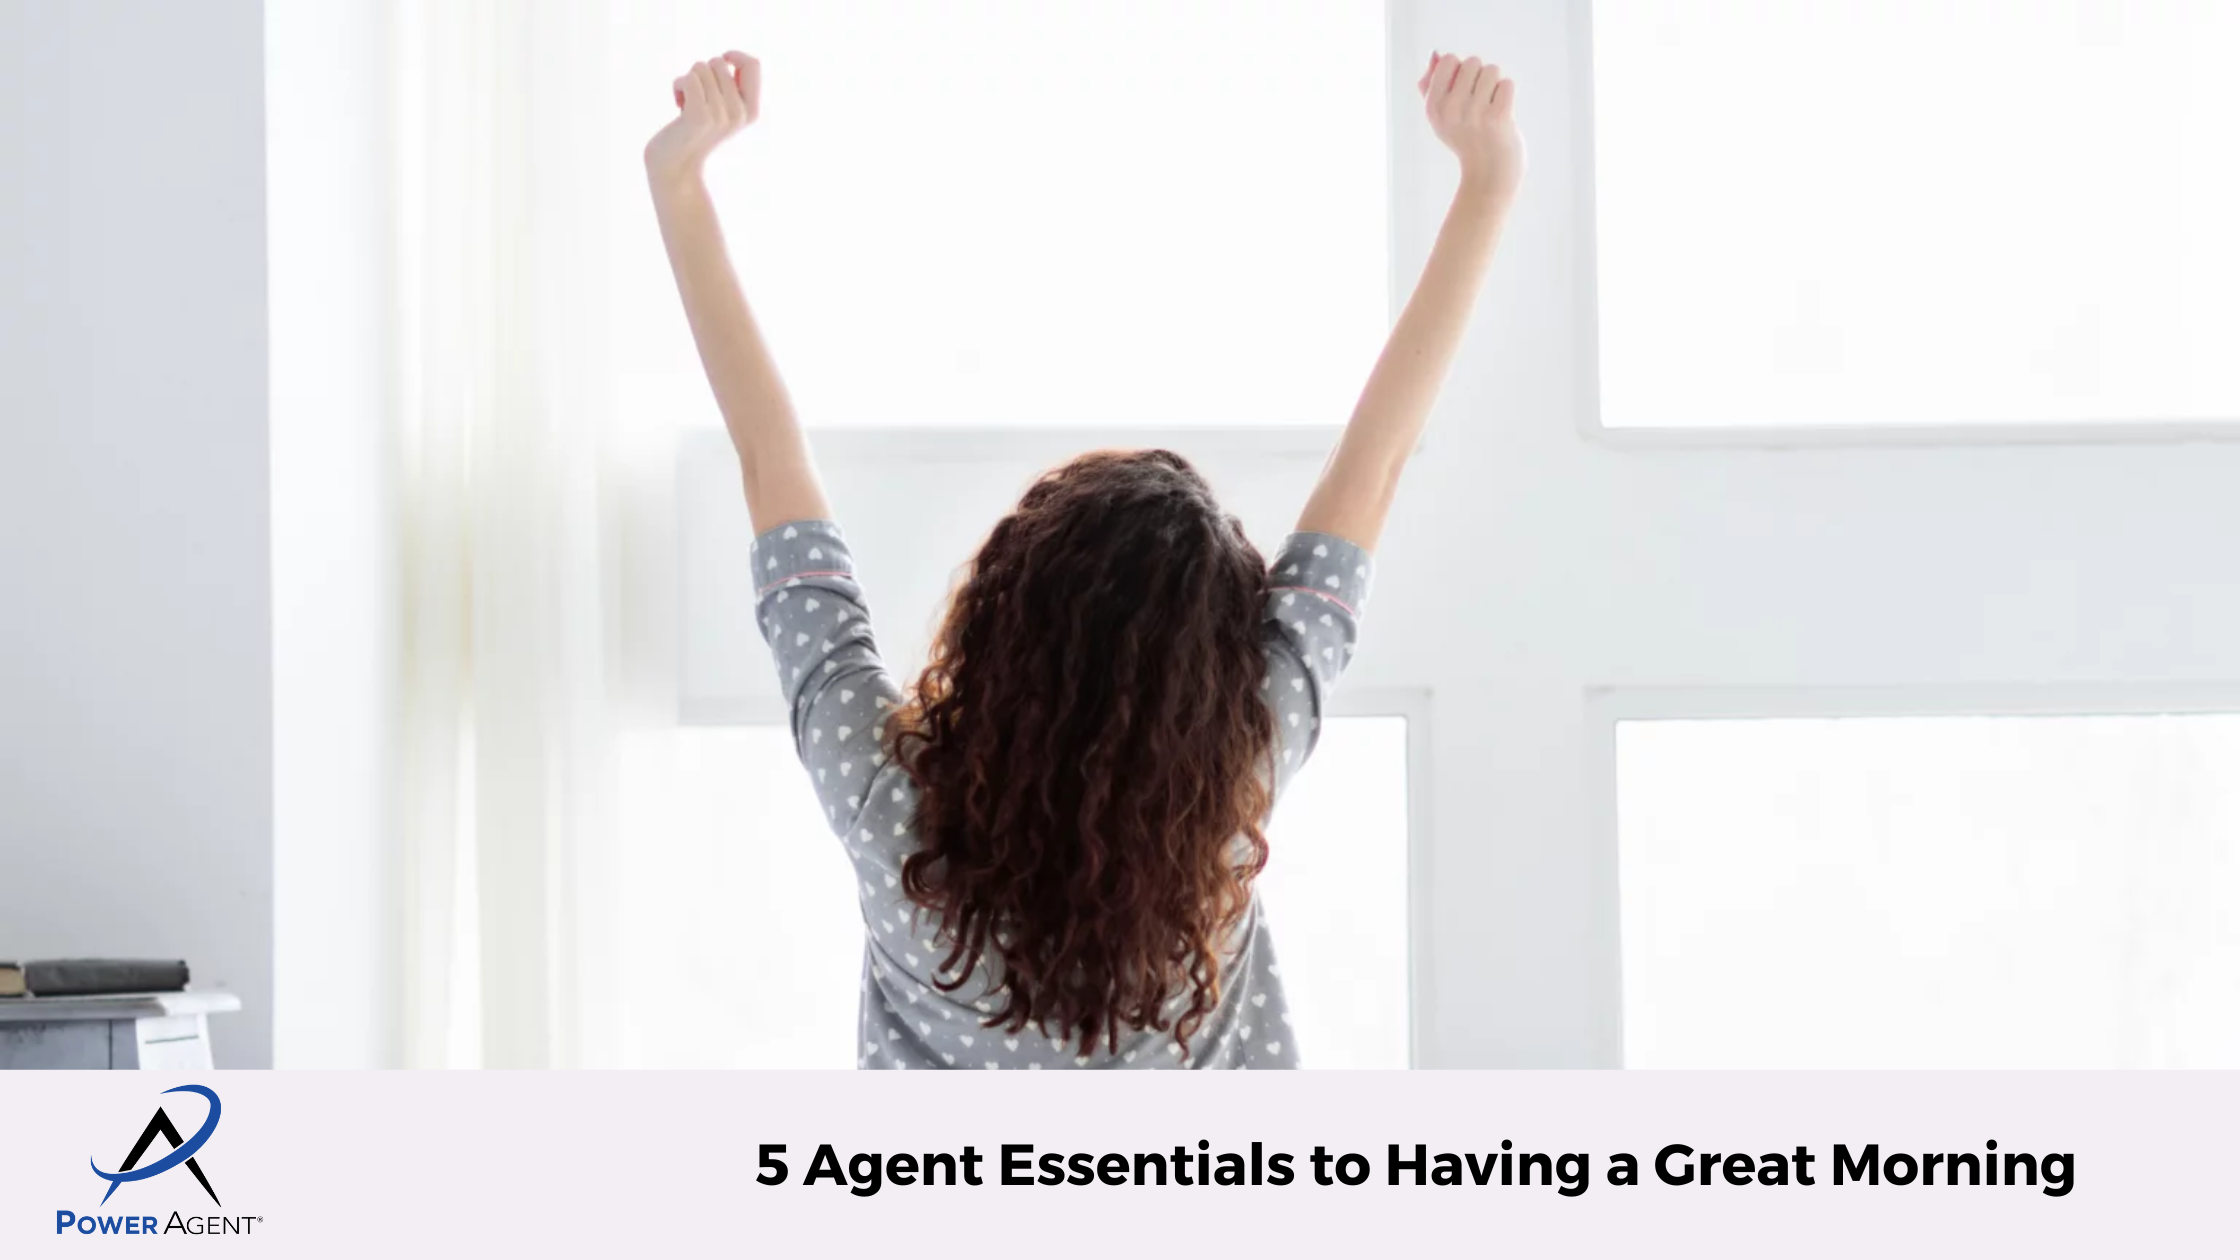 5 Agent Essentials to Having a Great Morning